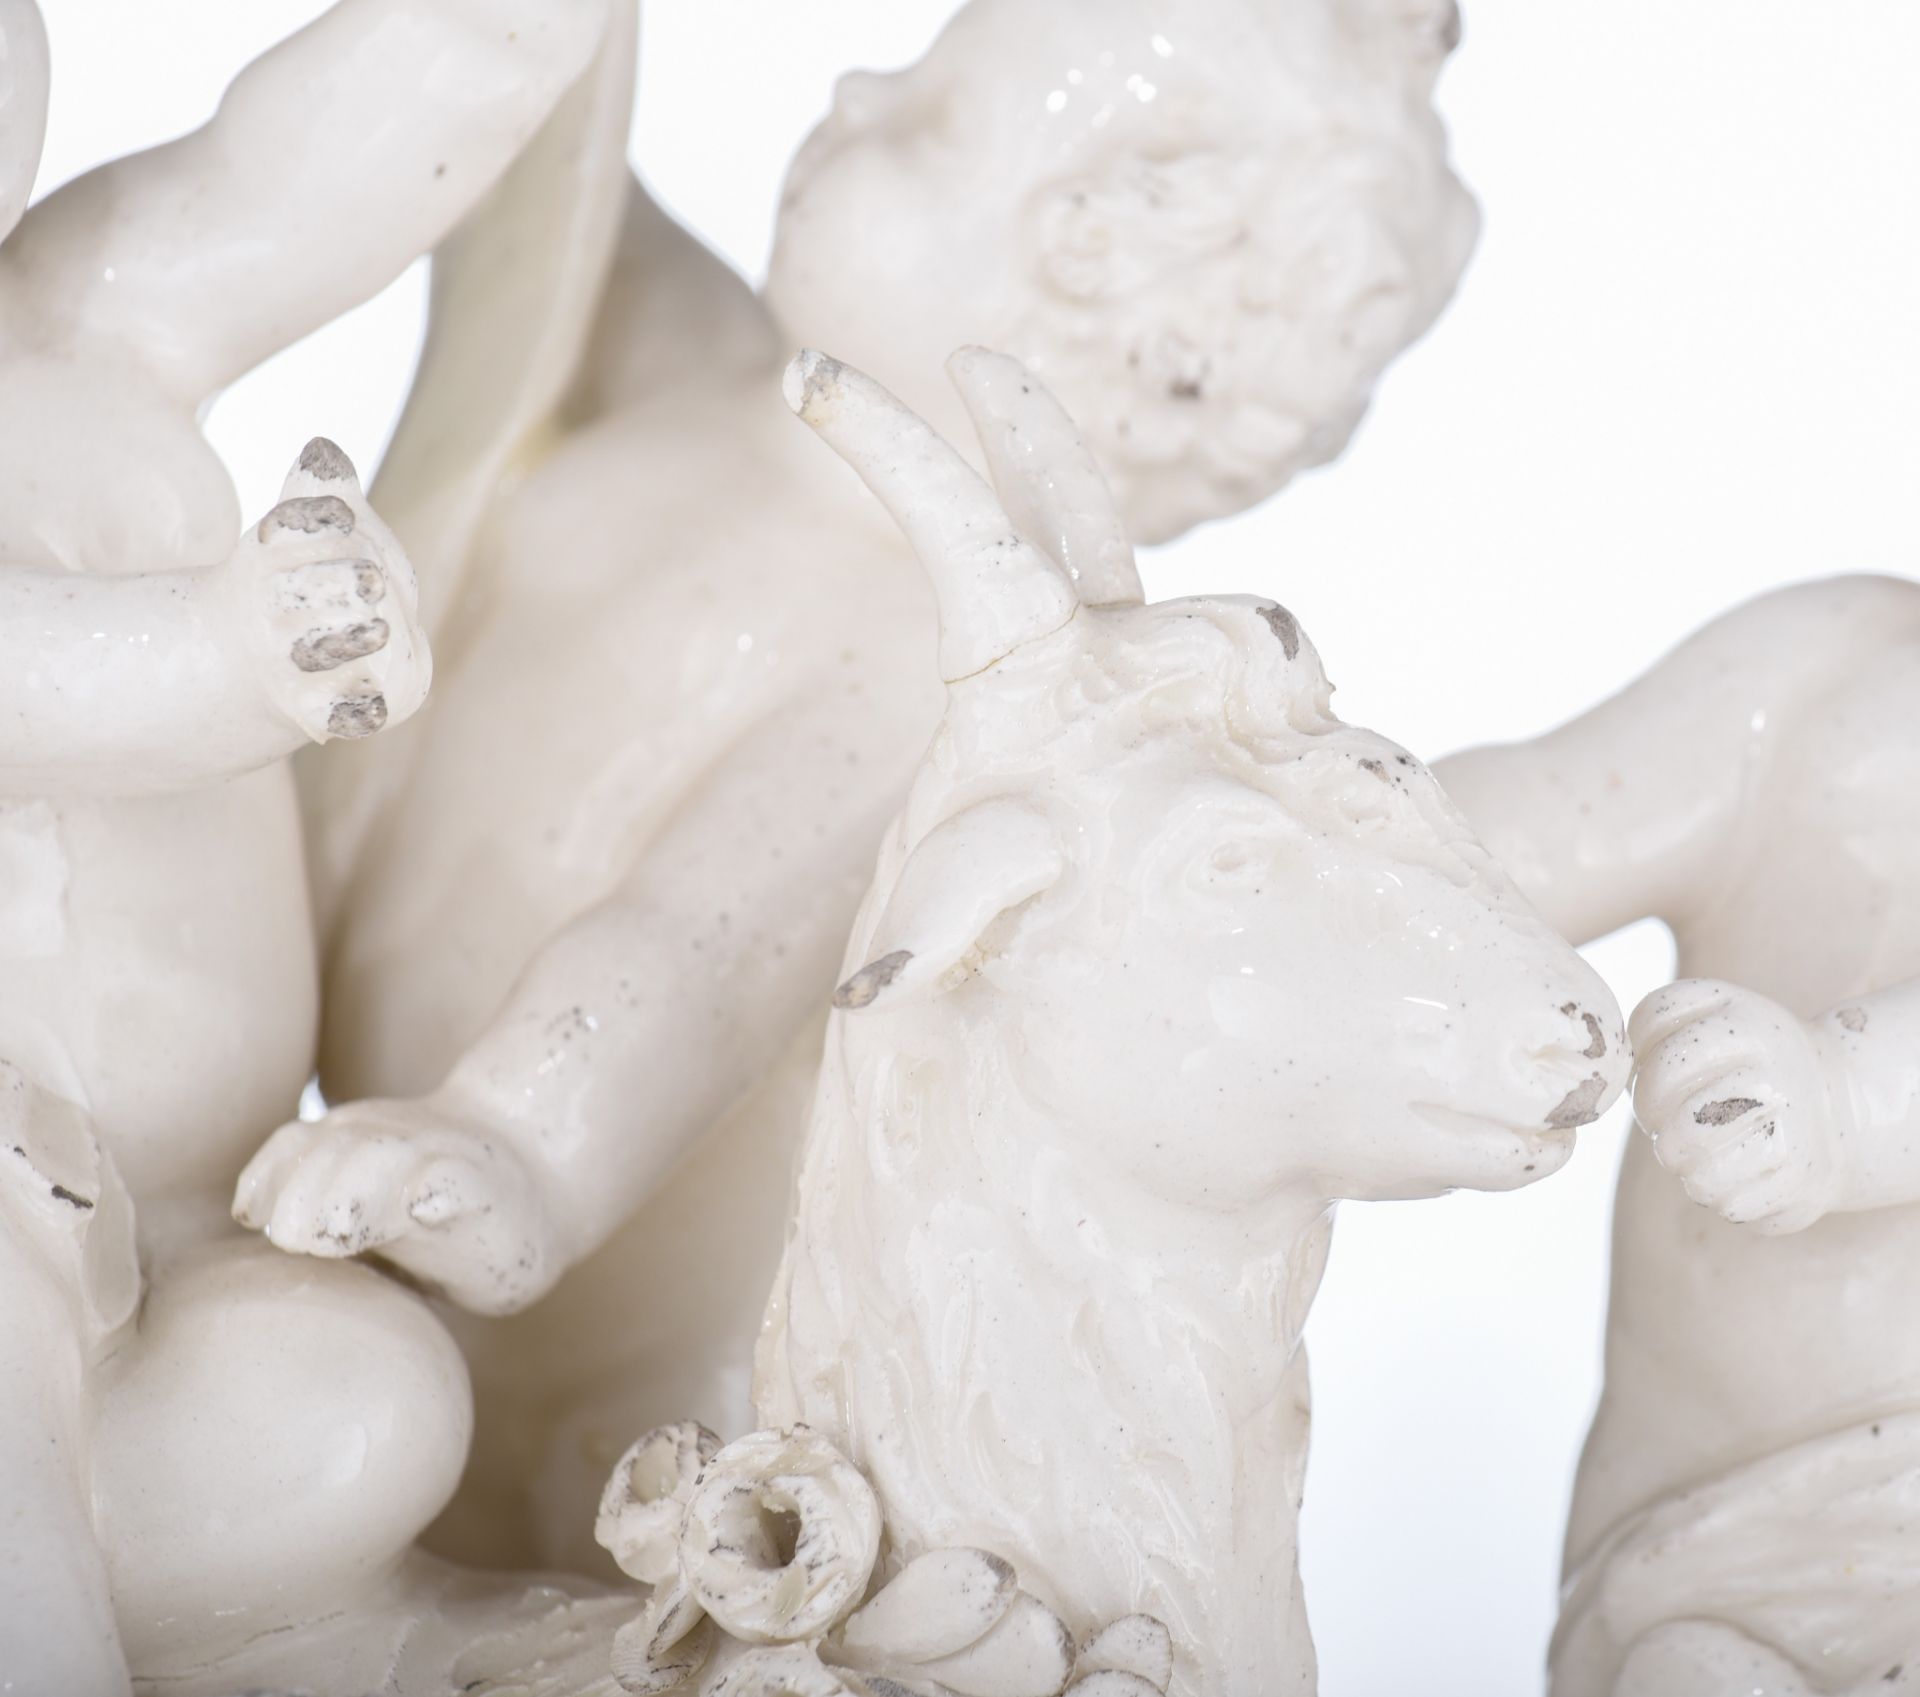 (BIDDING ONLY ON CARLOBONTE.BE) Two white glazed Capodimonte figural groups, Naples, H 20 - 23 cm - Image 11 of 16